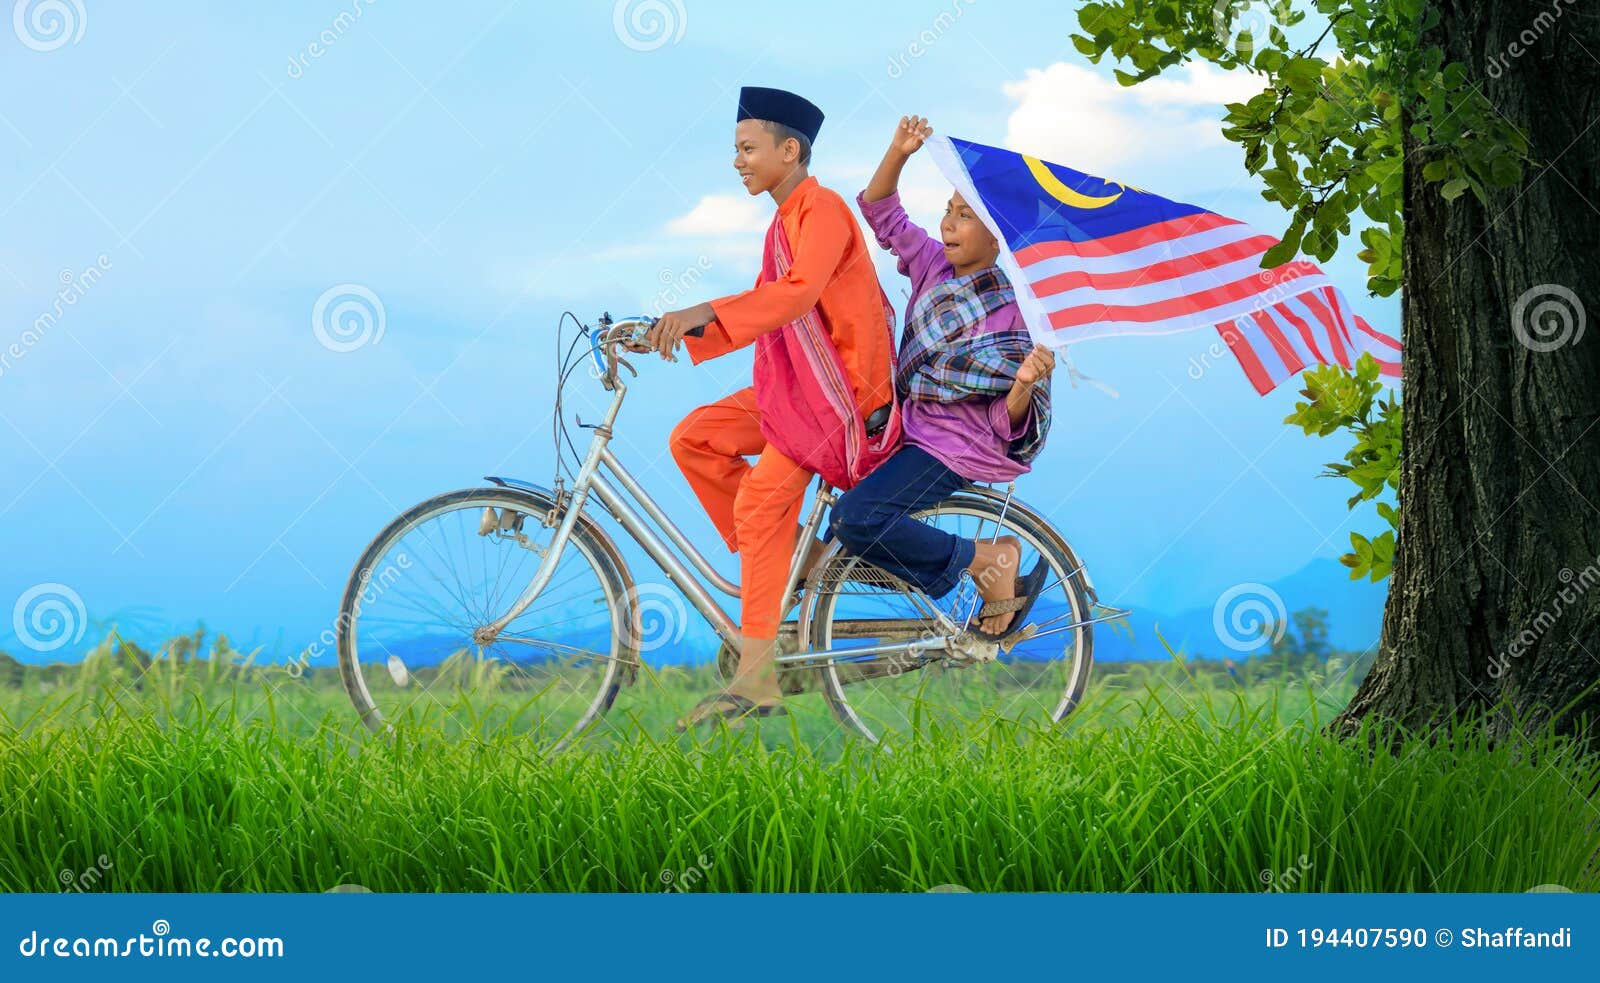 independence day concept - happy young local boy riding old bicycle at paddy field holding a malaysian flag